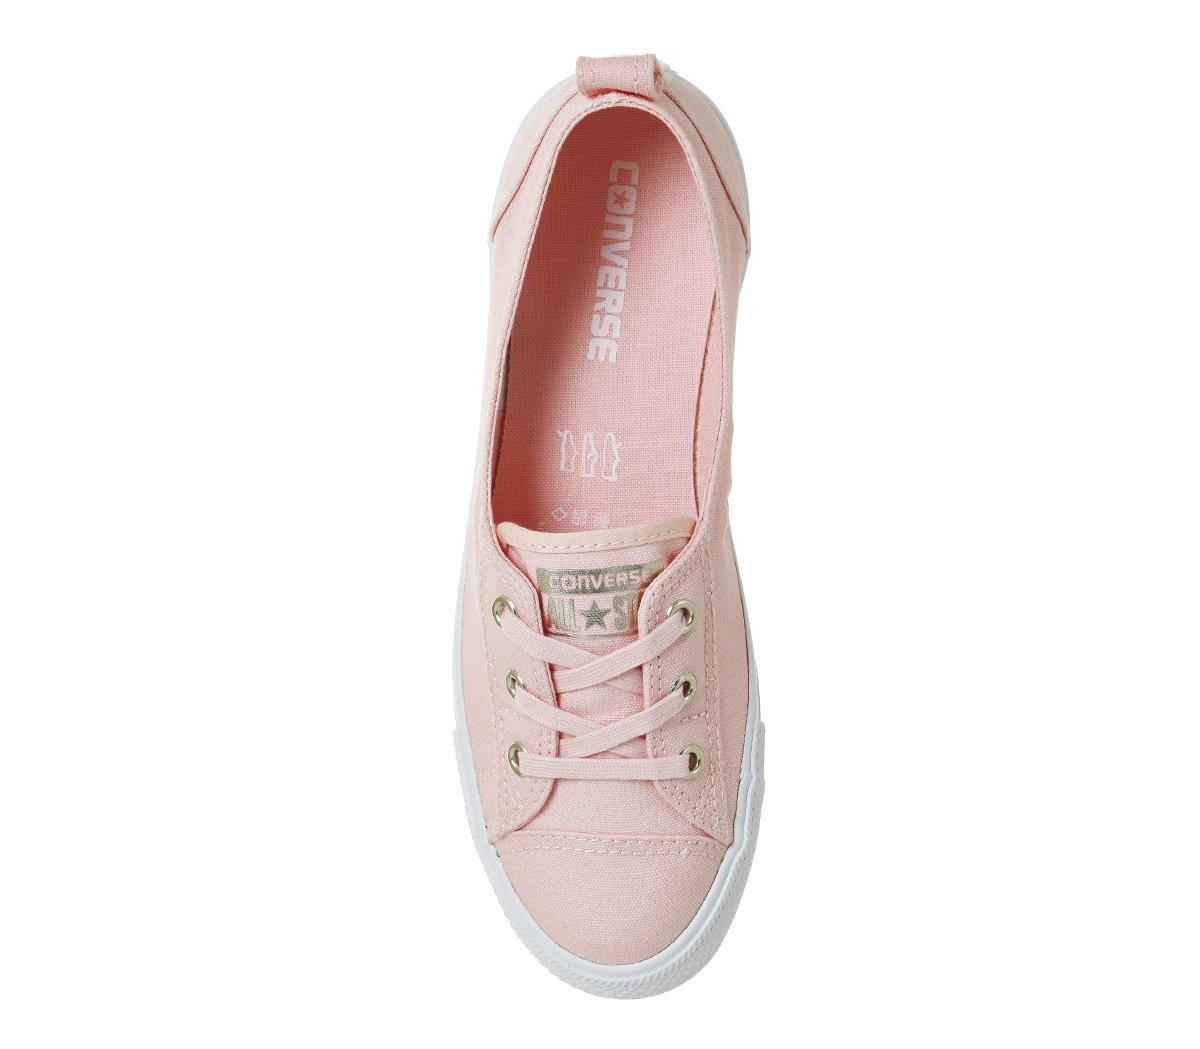 Converse Ctas Ballet Lace Trainers in Pink - Lyst